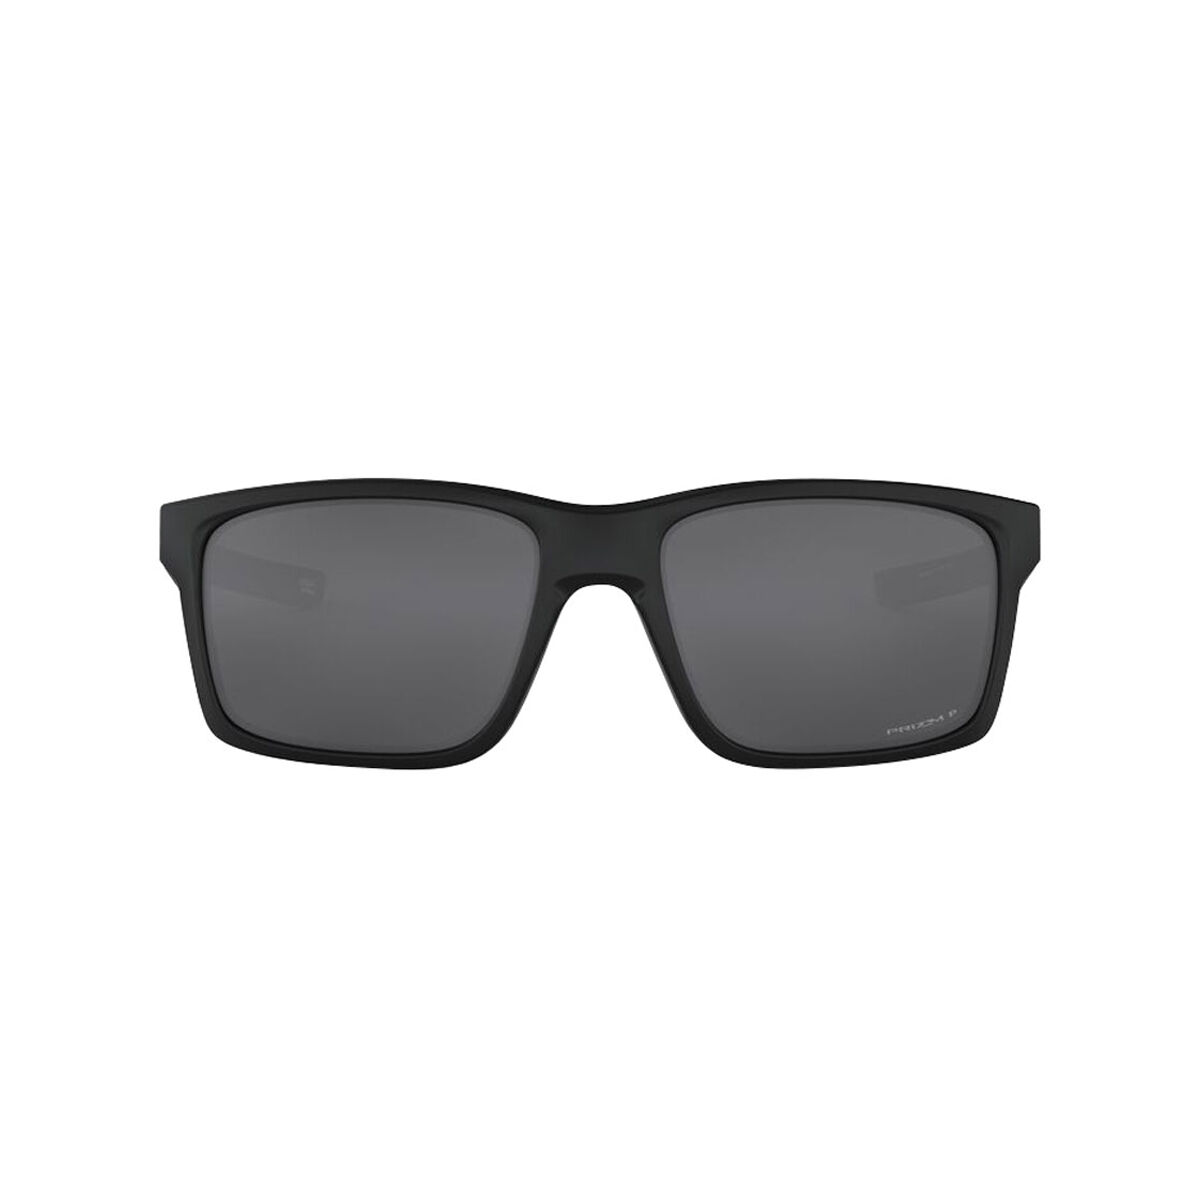 Sports Sunglasses - Running, Cycling & Outdoor - rebel